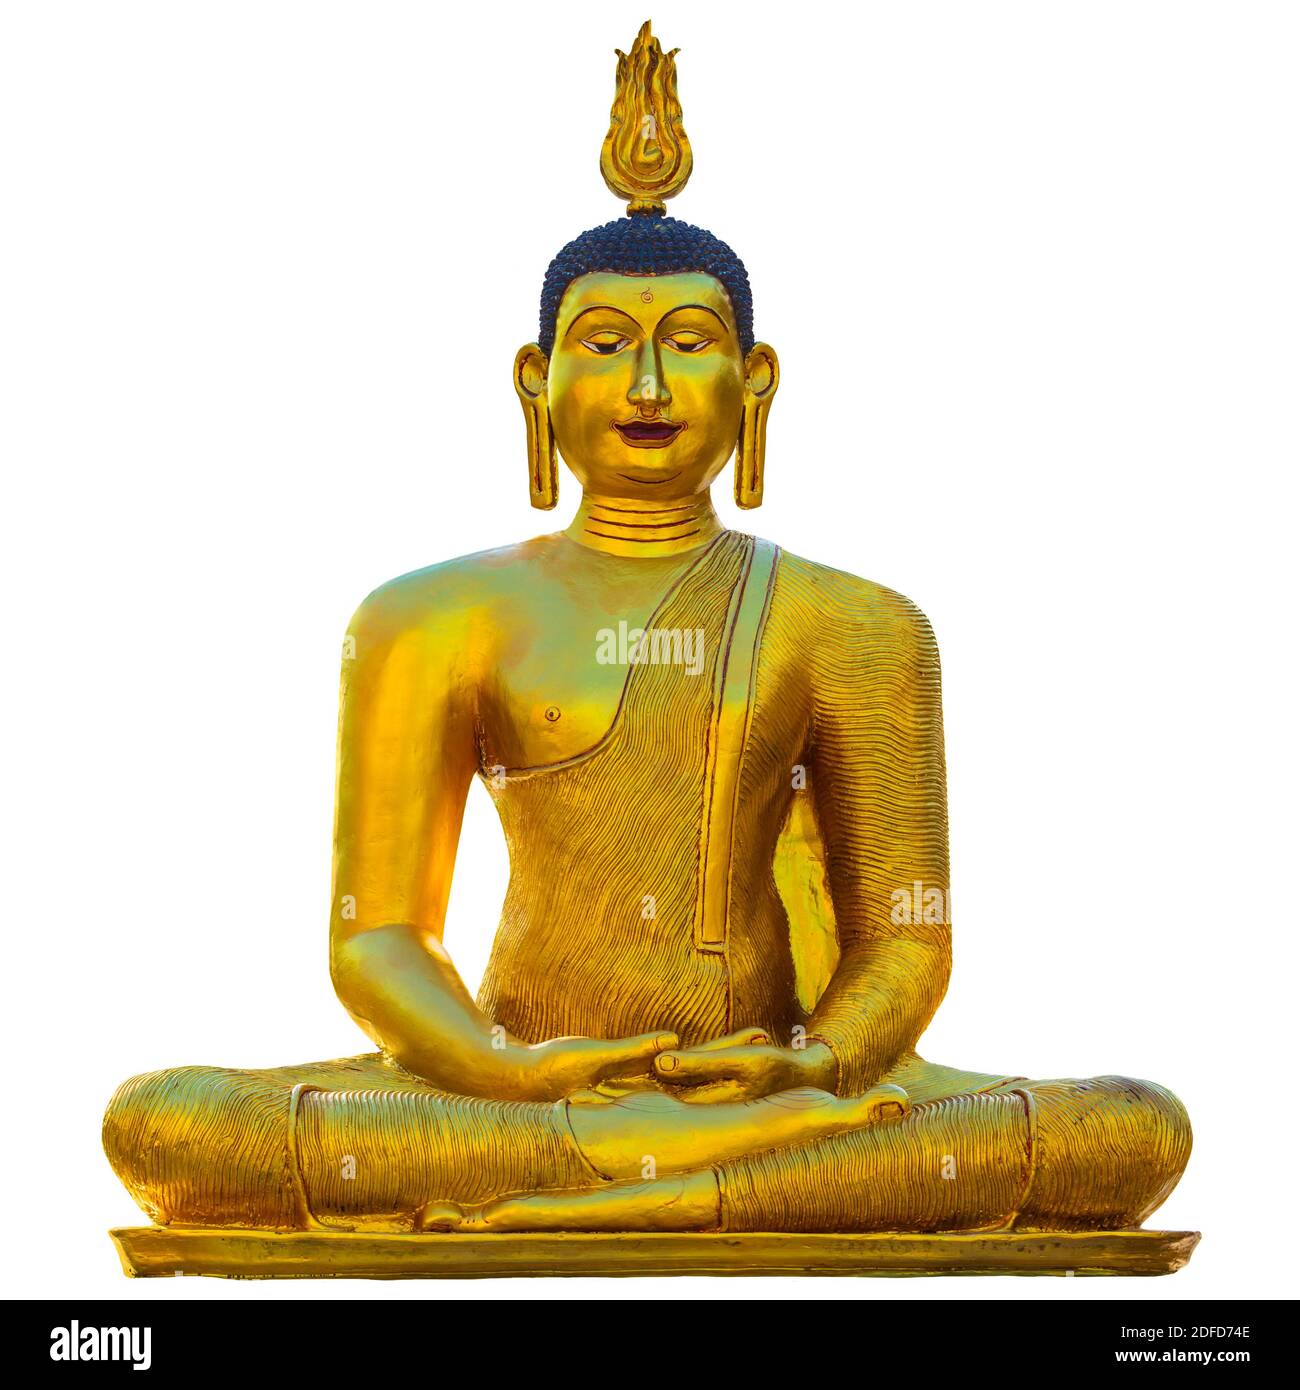 Golden buddha statue isolated on a white background Stock Photo